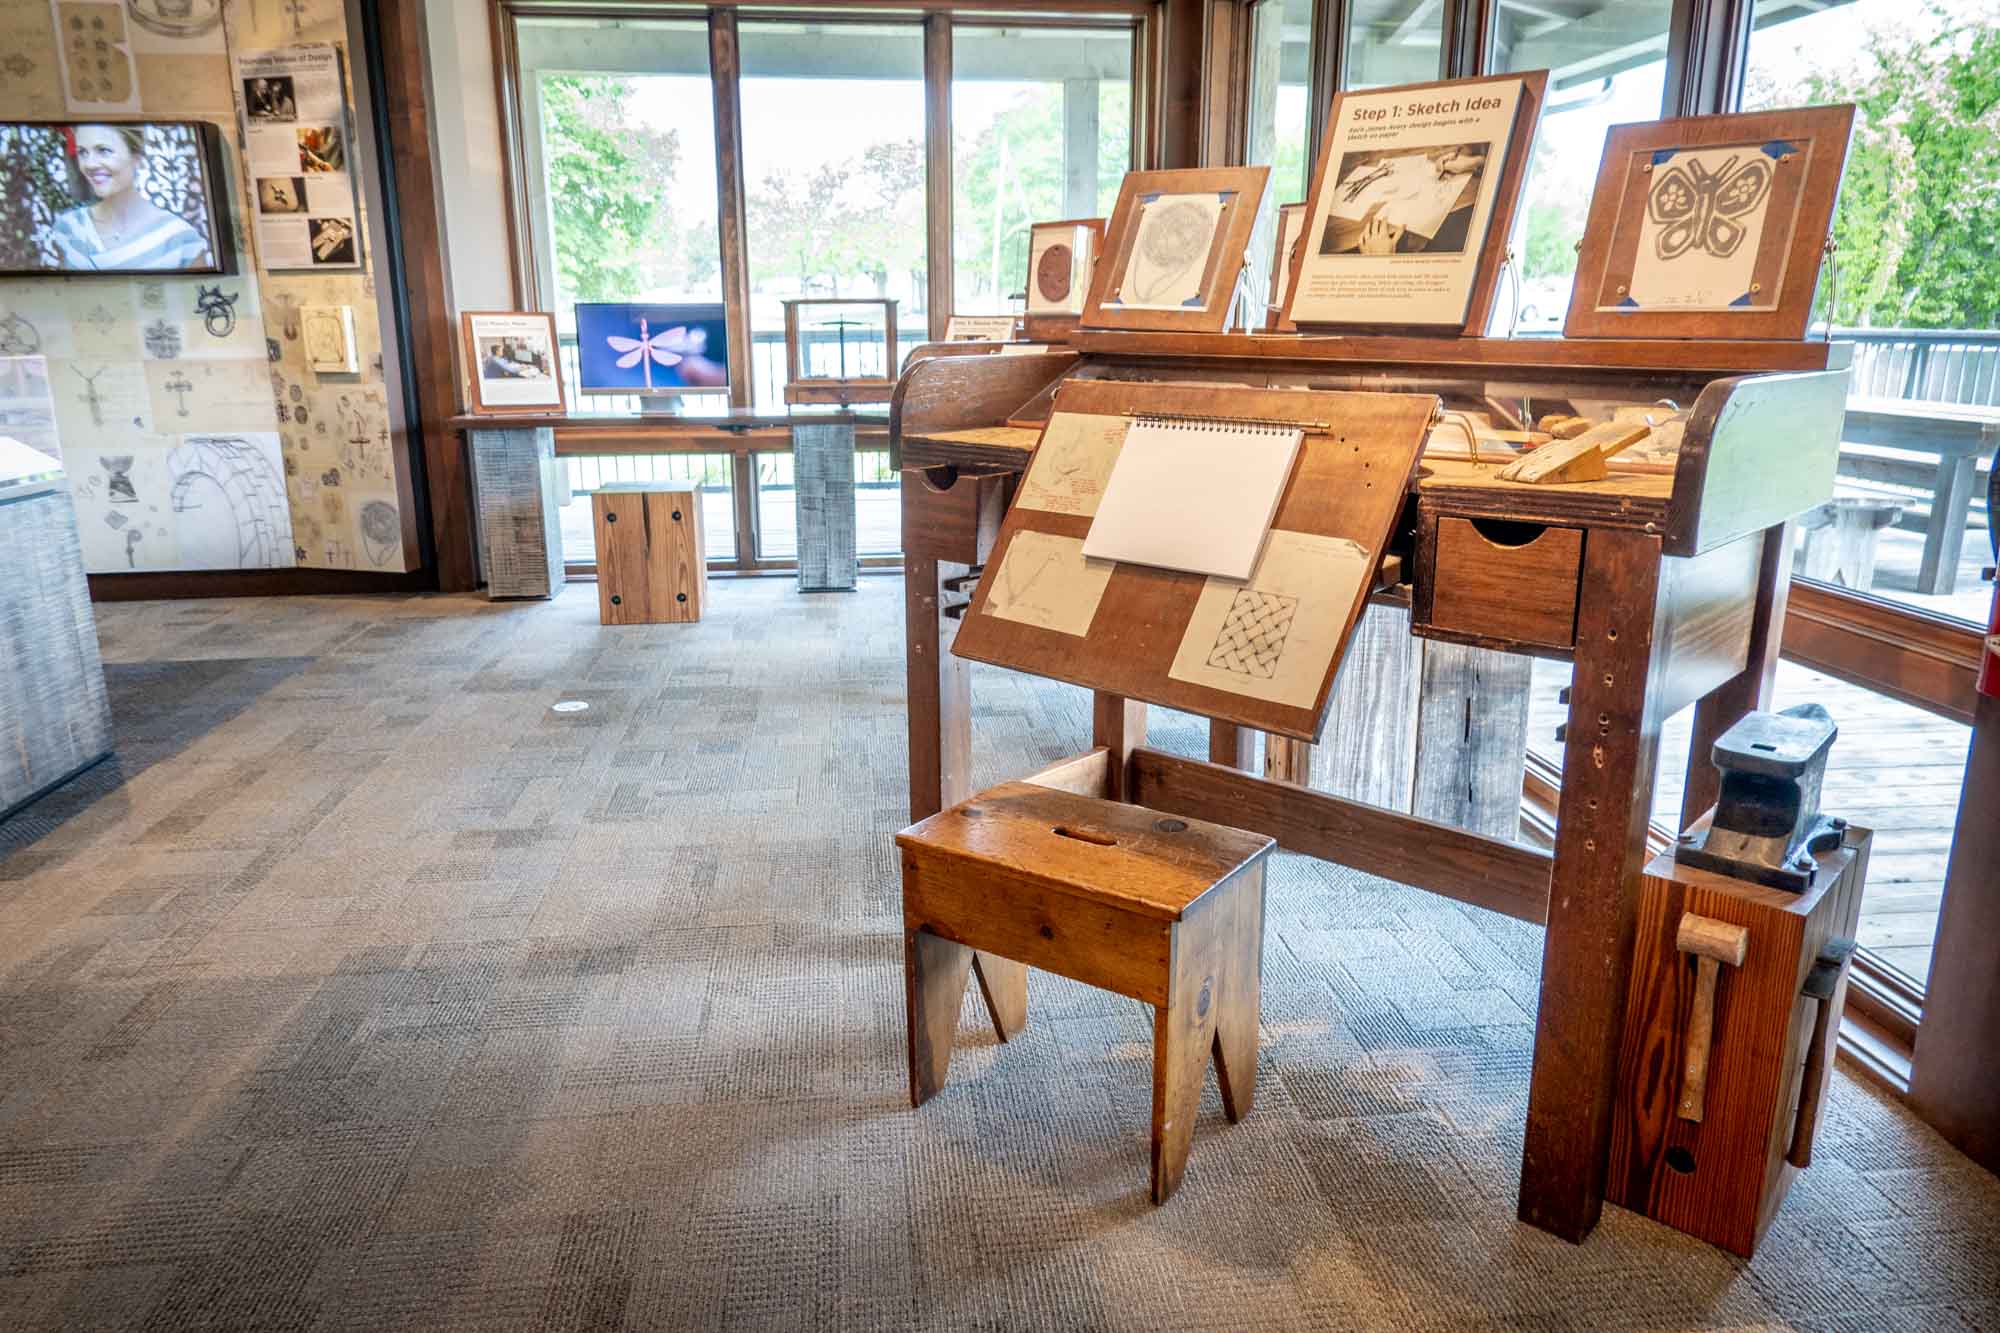 Museum display including a drafting table, sketch pads, and a video screen